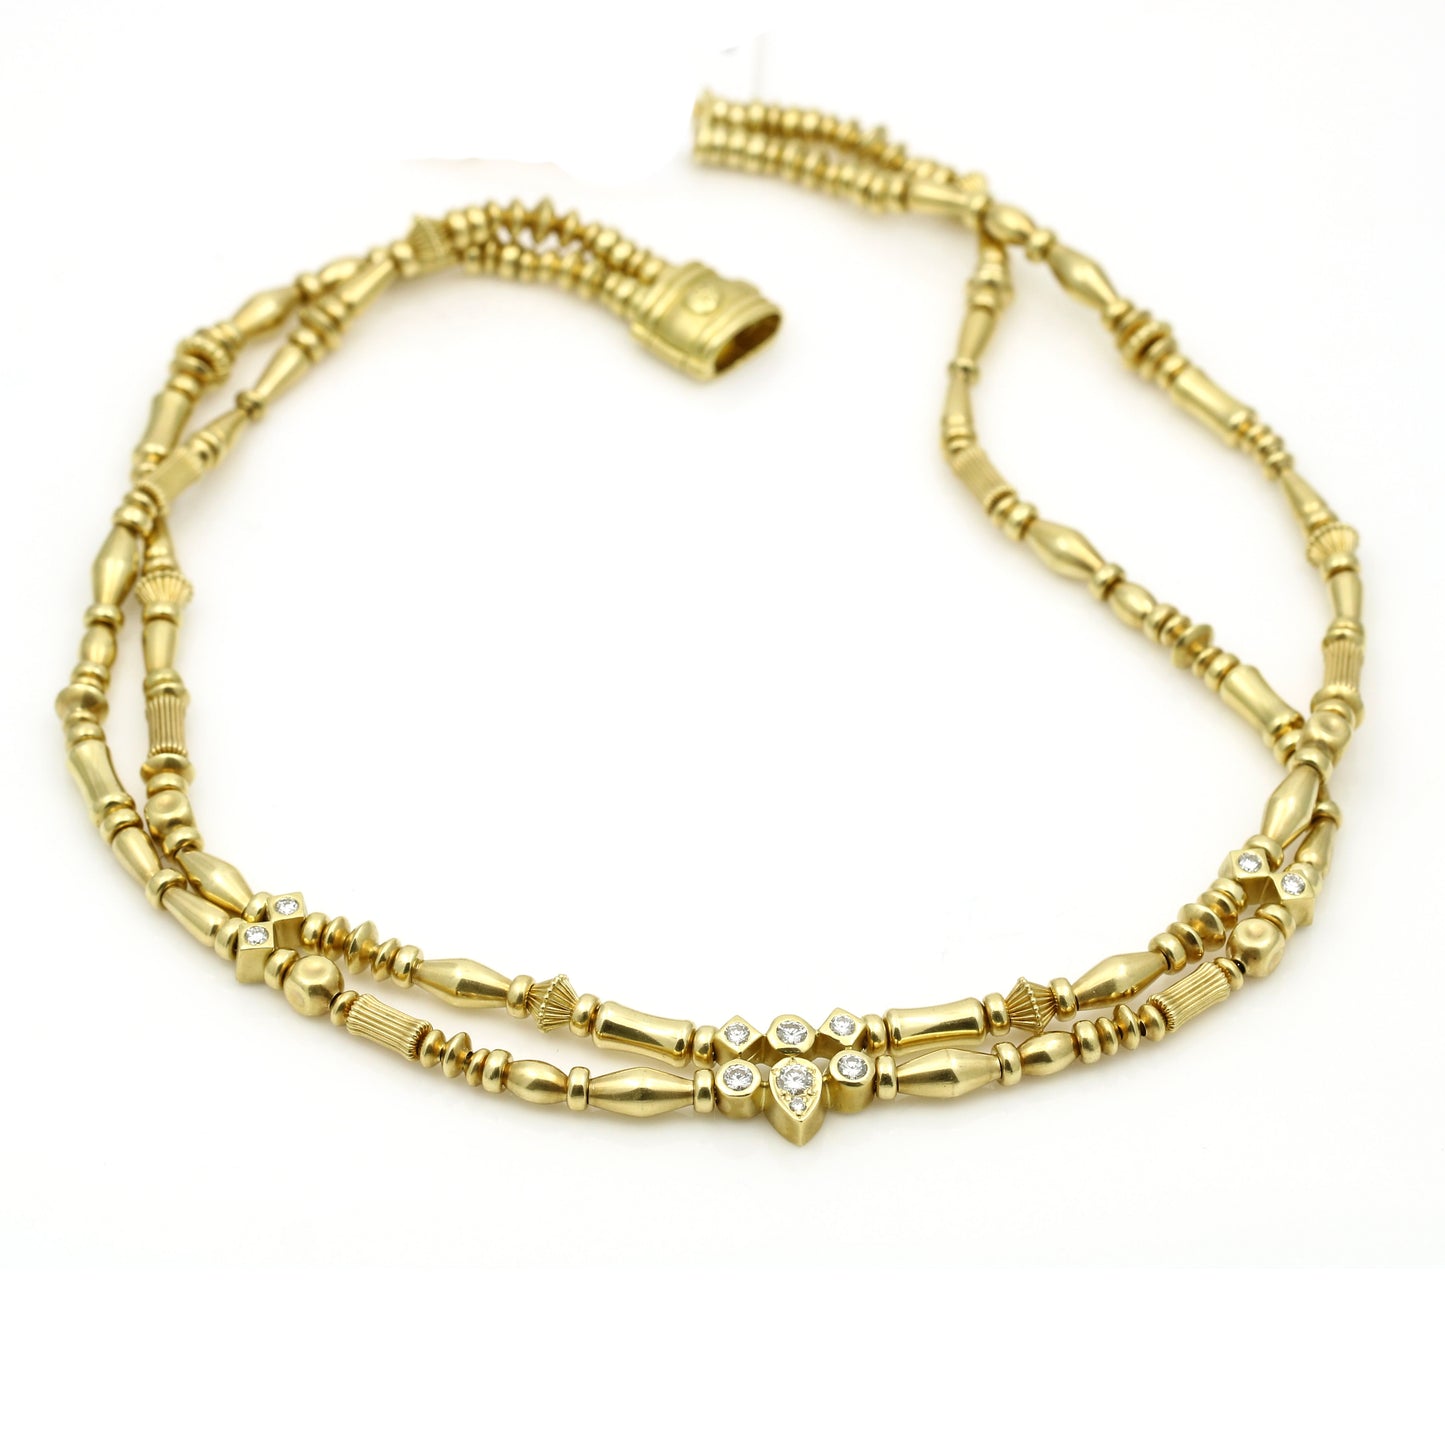 Seidengang Diamond Beads Double Chain Necklace in 18k Yellow Gold